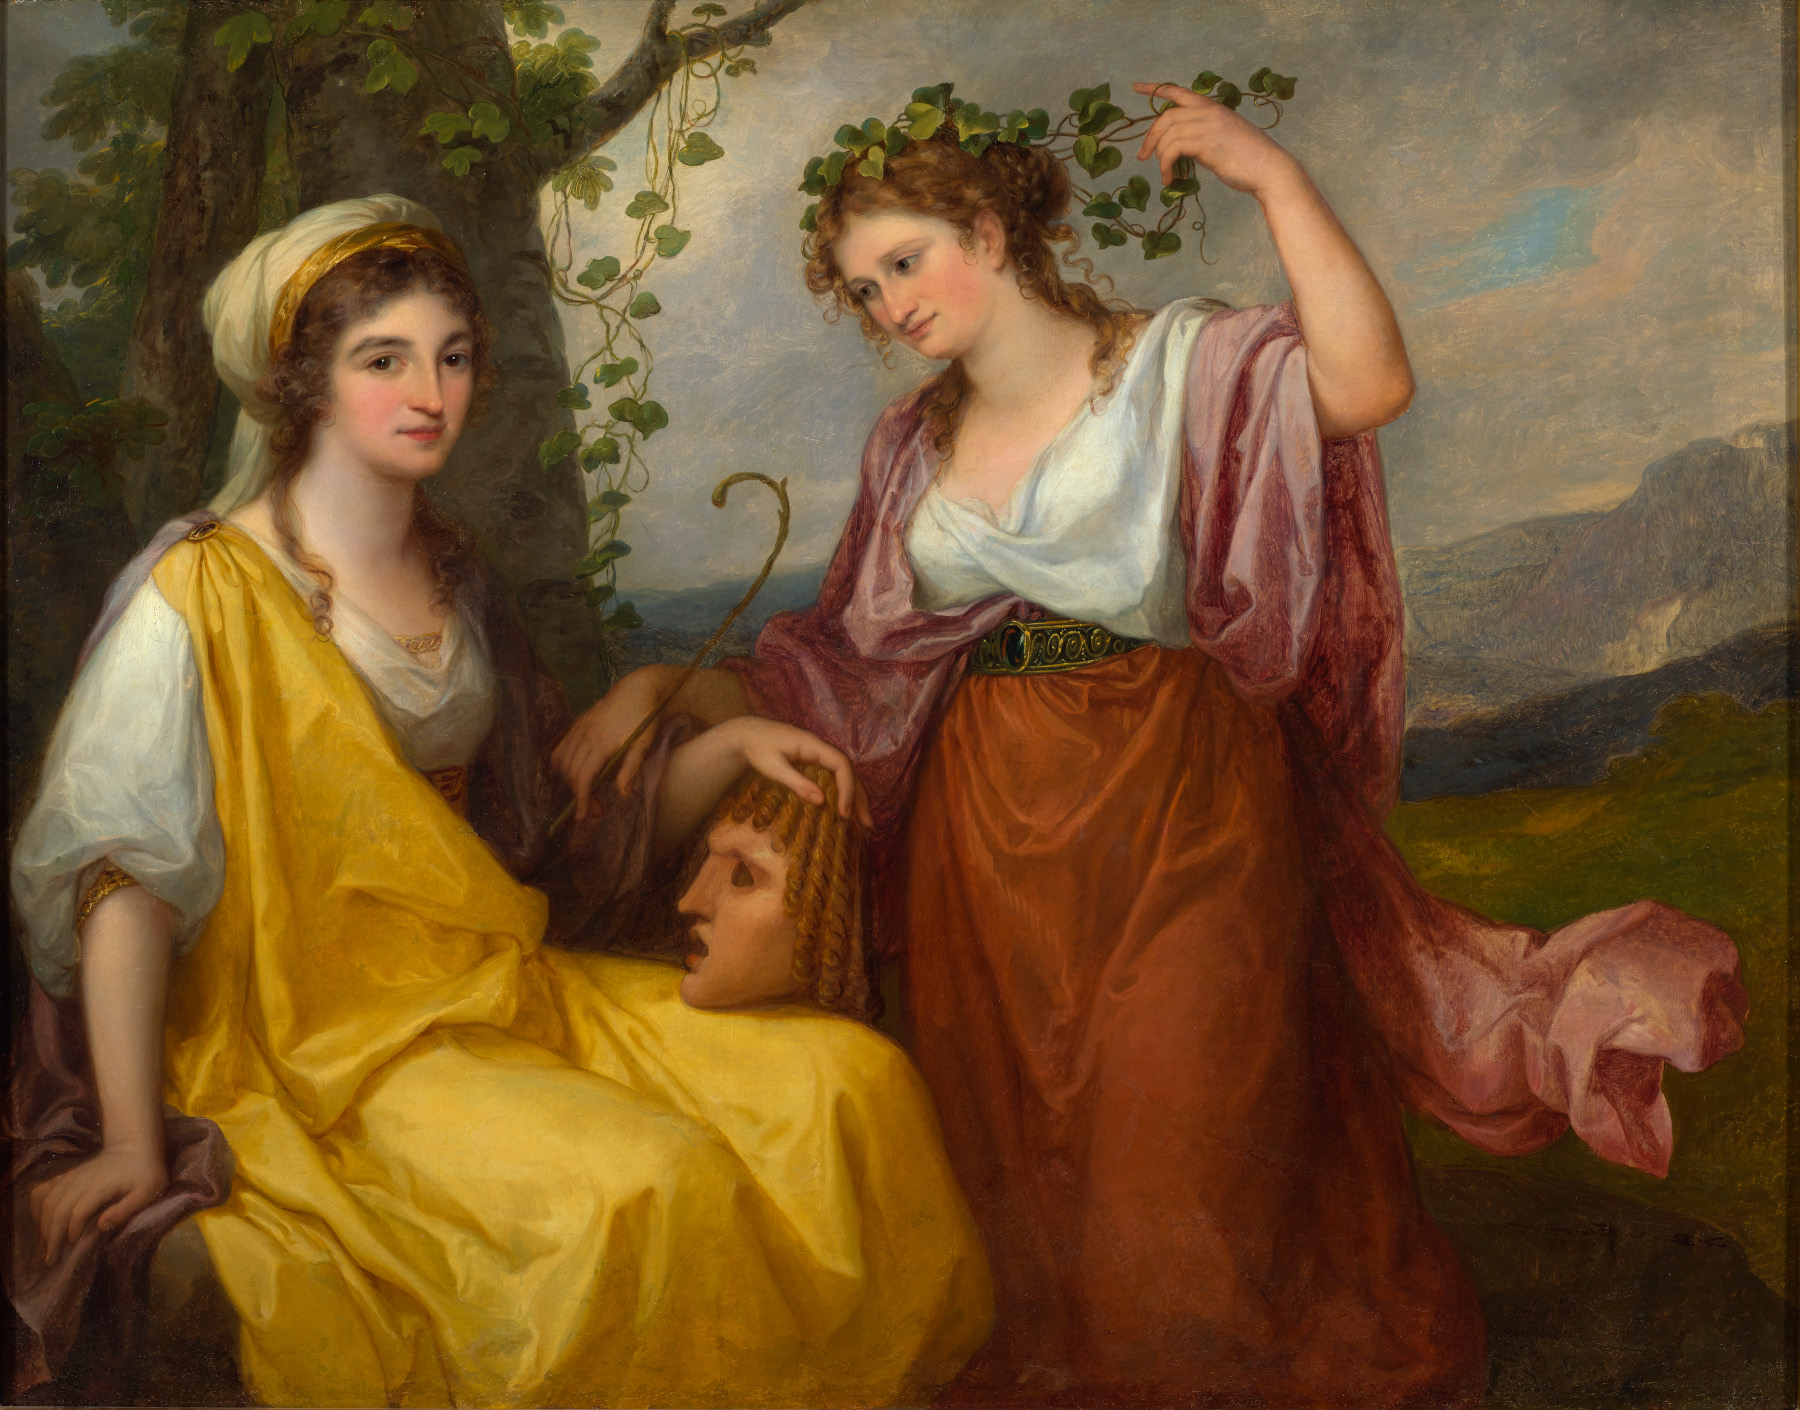 Angelica Kauffman, Portraits of Domenica Morghen and Maddalena Volpato as Muses of Tragedy and Comedy, 1791.